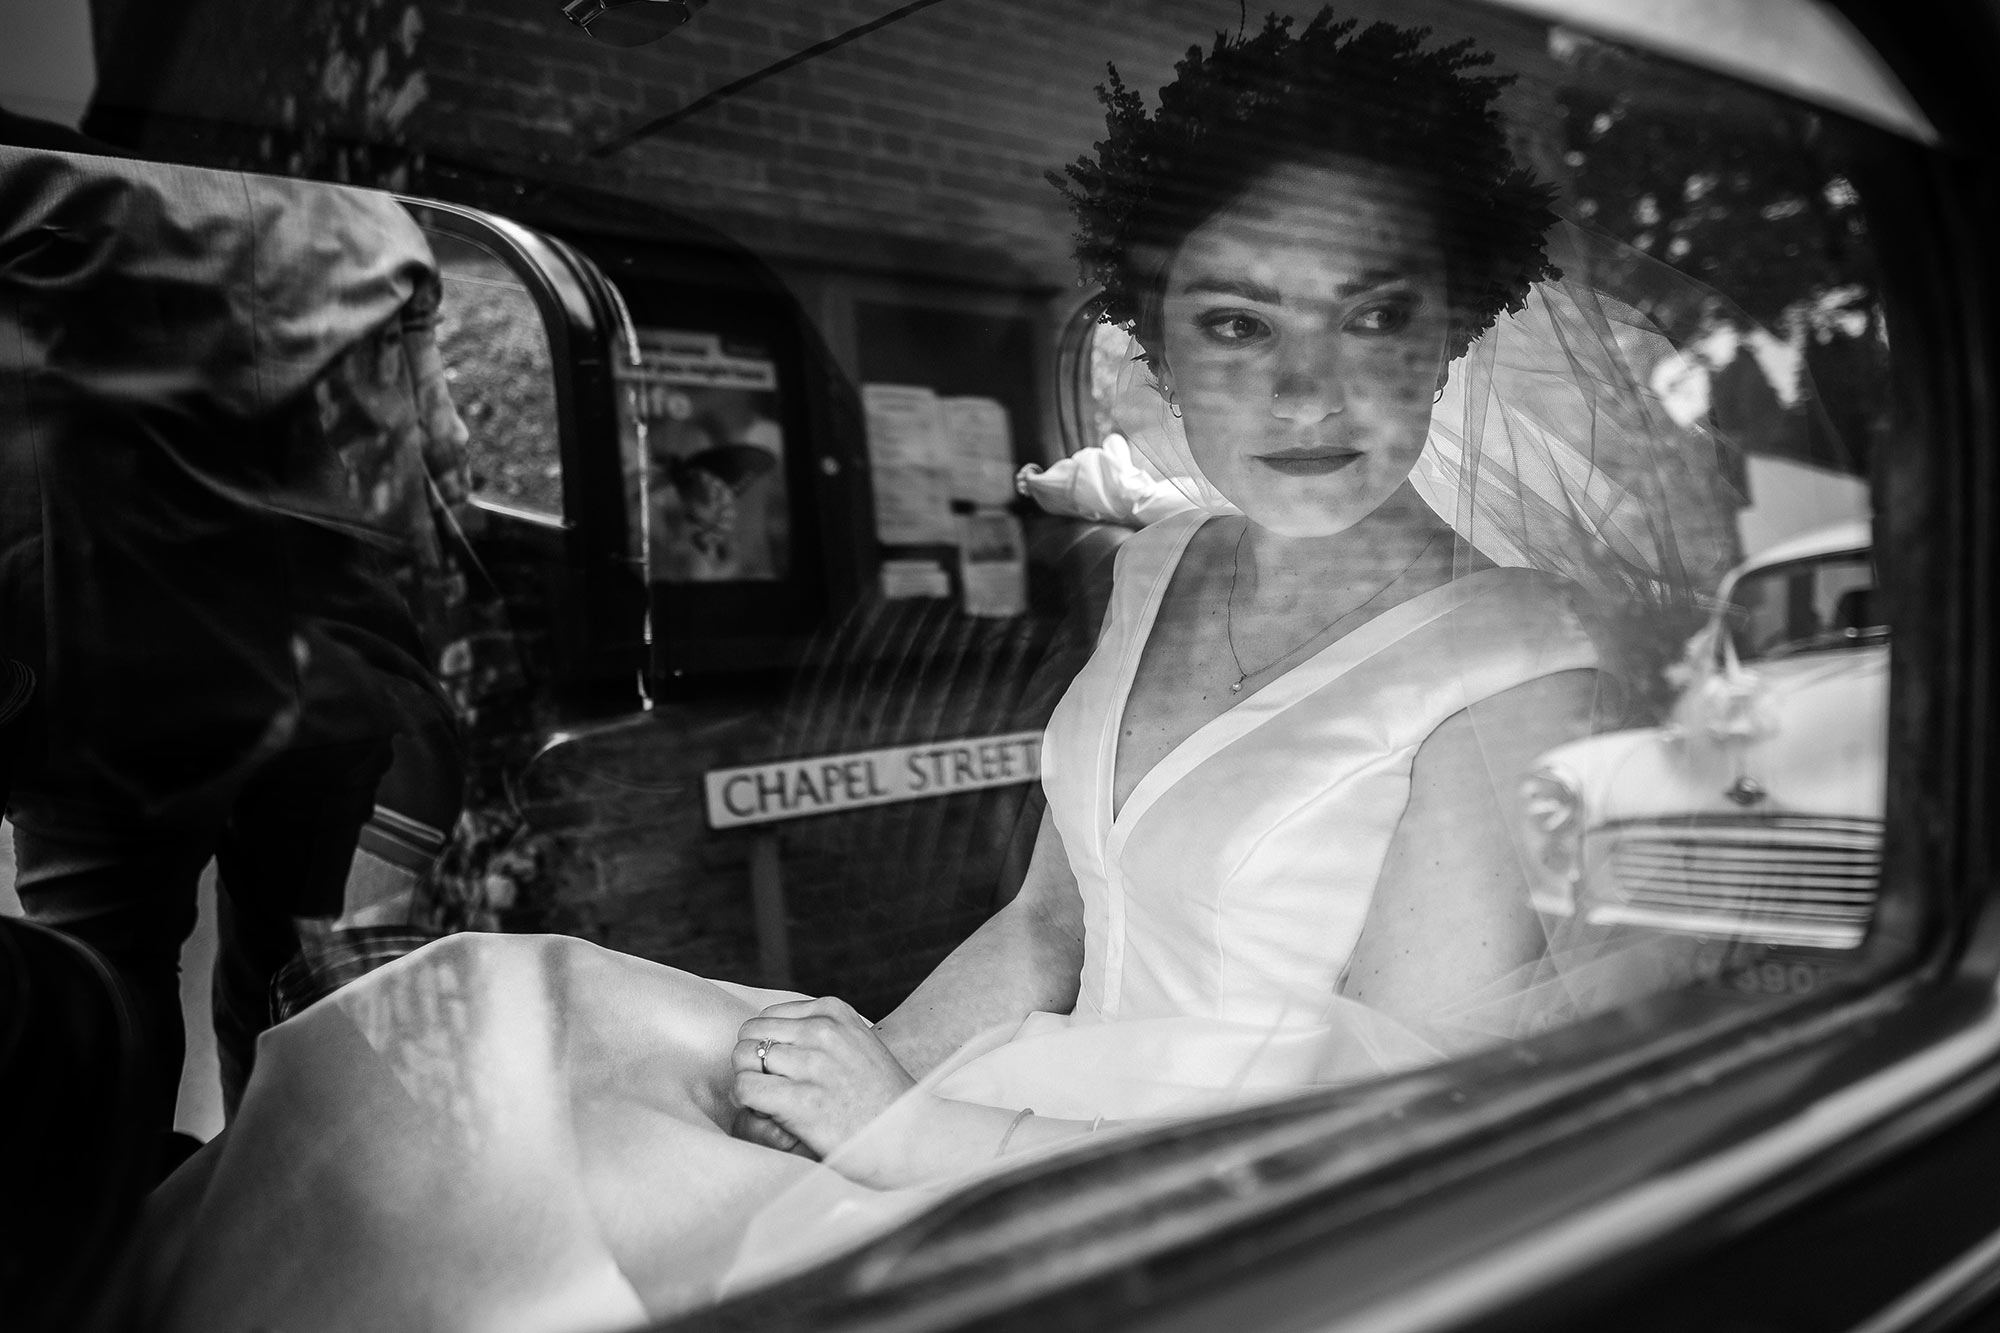 Dreamy black and white wedding day photograph of a bride through a car window. By Smiling Tiger Studios